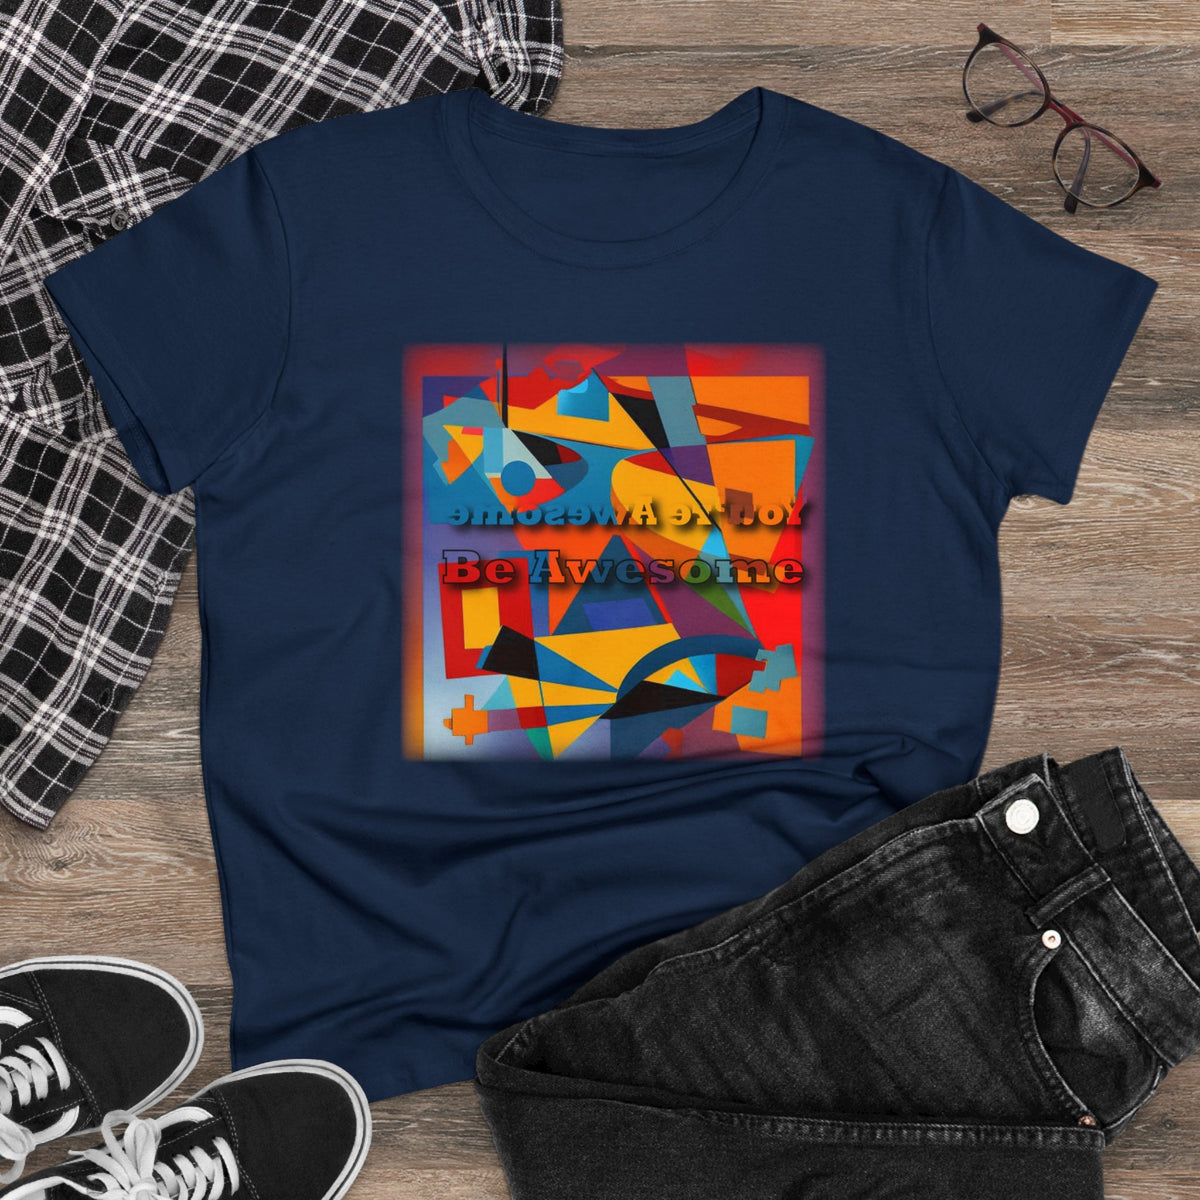 Inspirational T Shirts - Be Awesome 